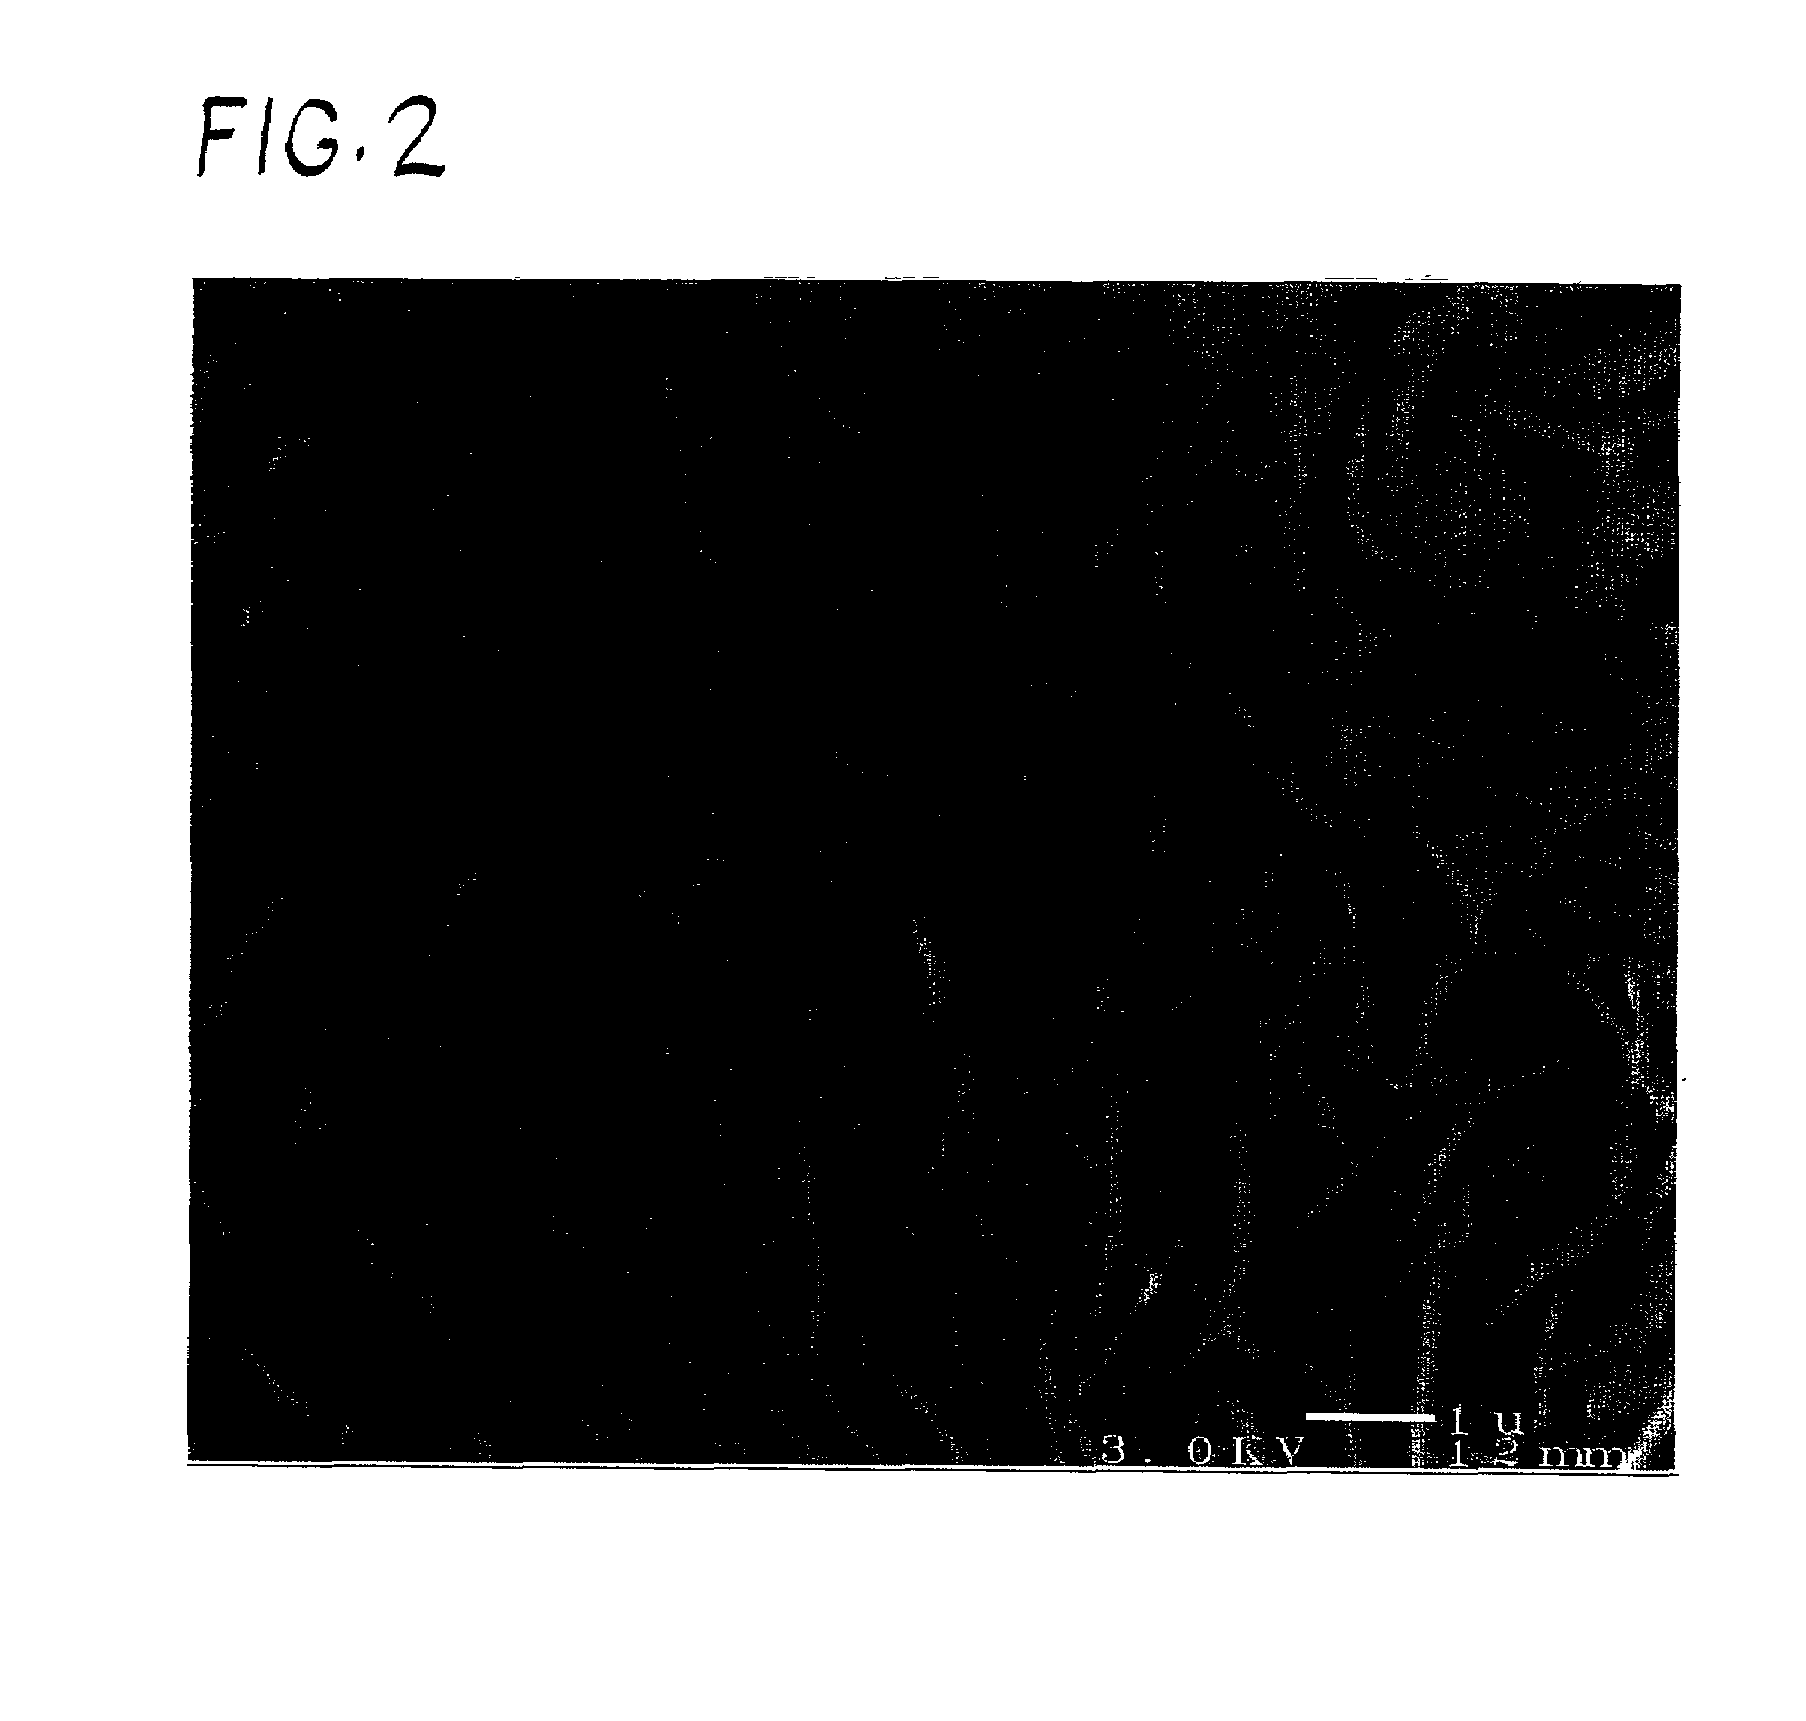 Electrolytic deposition of coatings for prosthetic metals and alloys